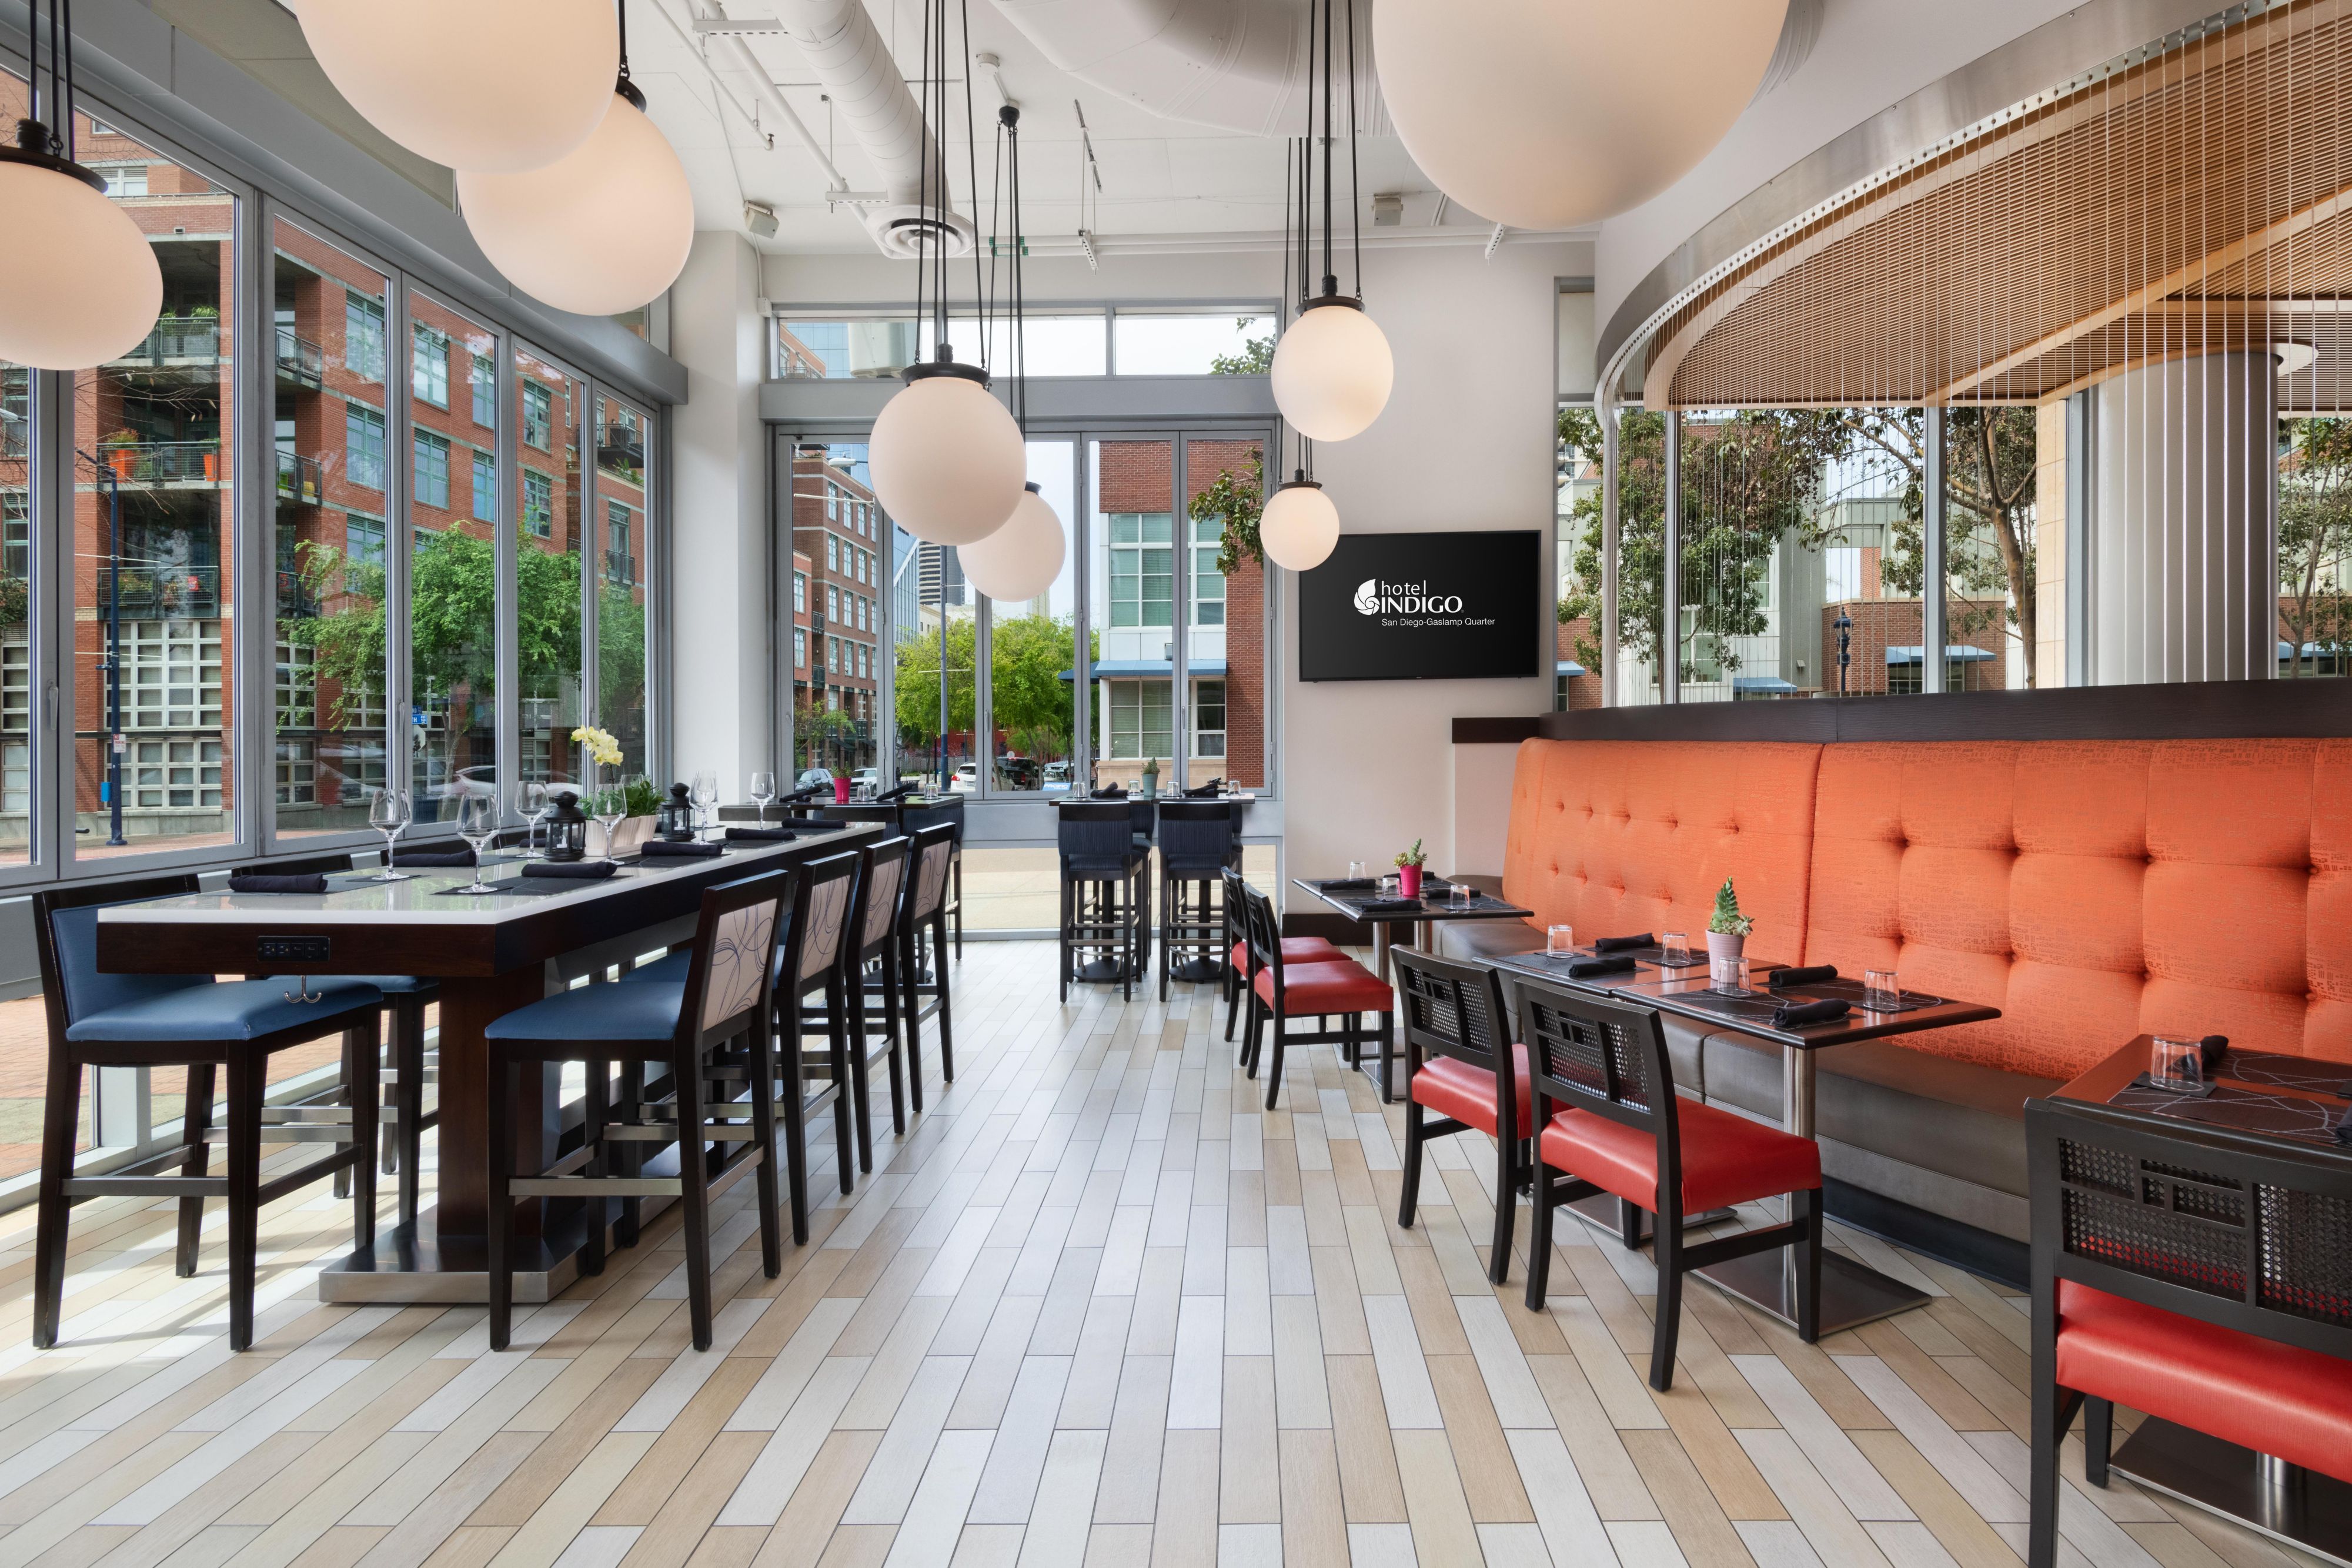 With 1,475 square feet of bright restaurant and bar space, Table 509 is an excellent setting for parties, rehearsal dinners, and company celebrations.